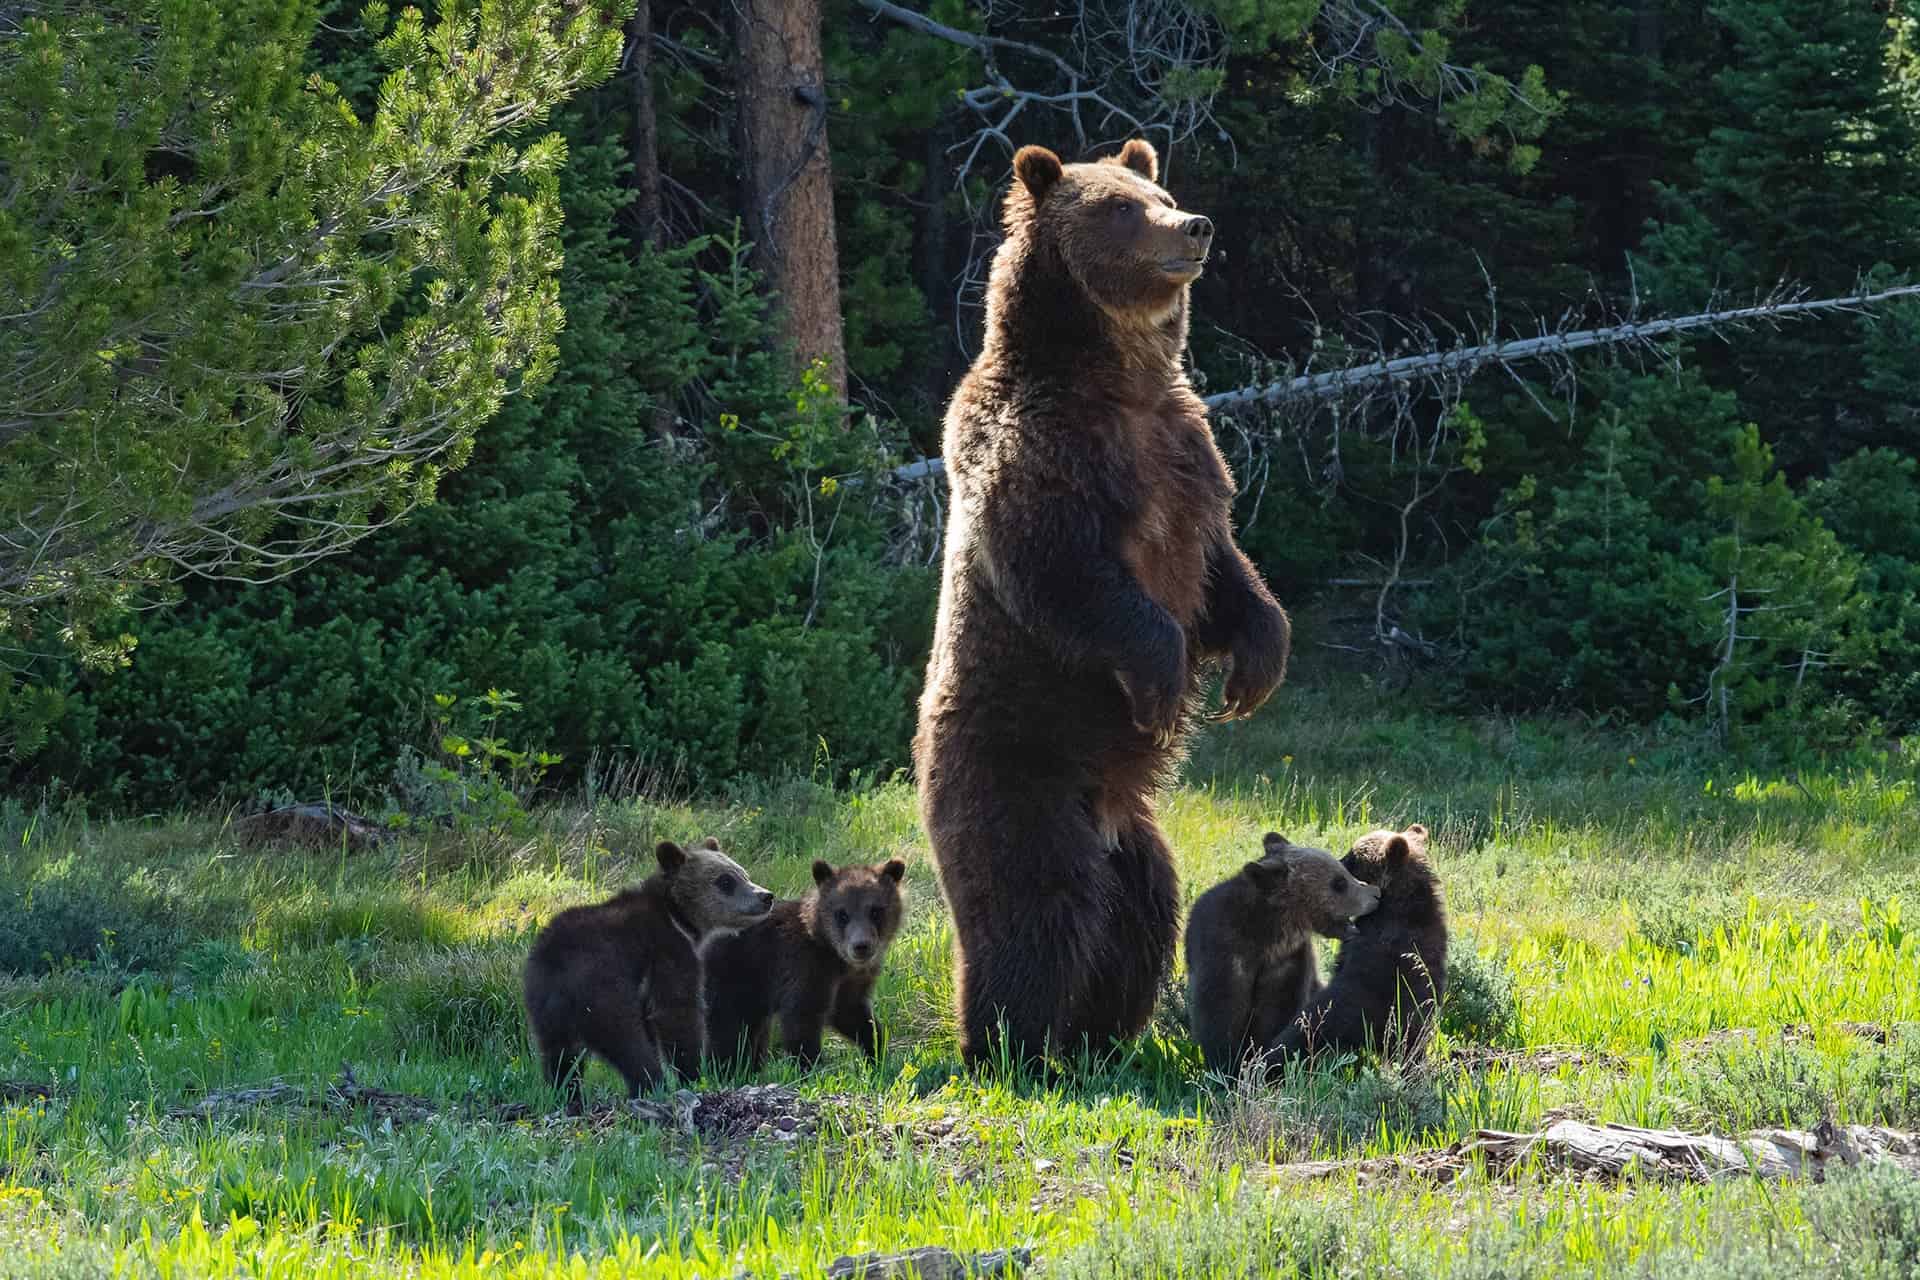 'She still lives!' Famed Yellowstone grizzly bear emerges from winter – with cubs